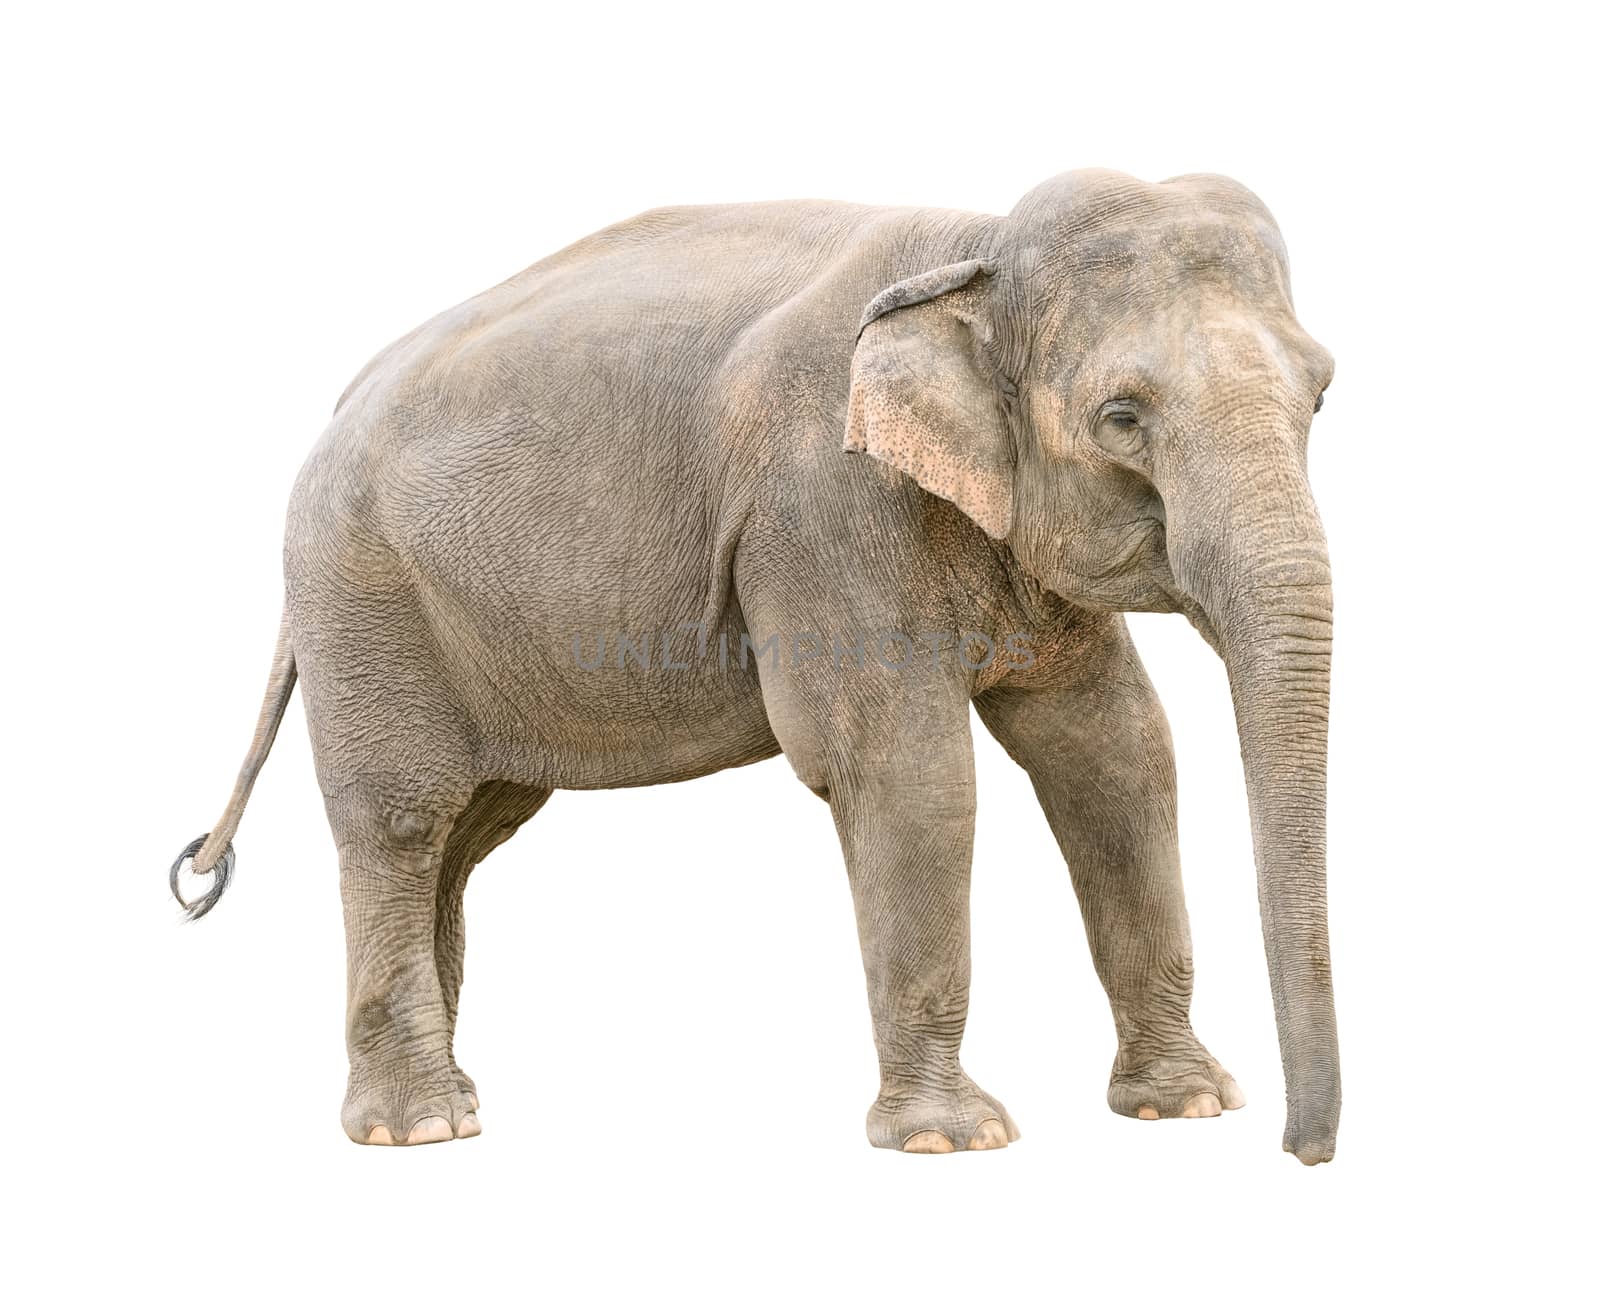 Asian elephant young female cutout by vkstudio